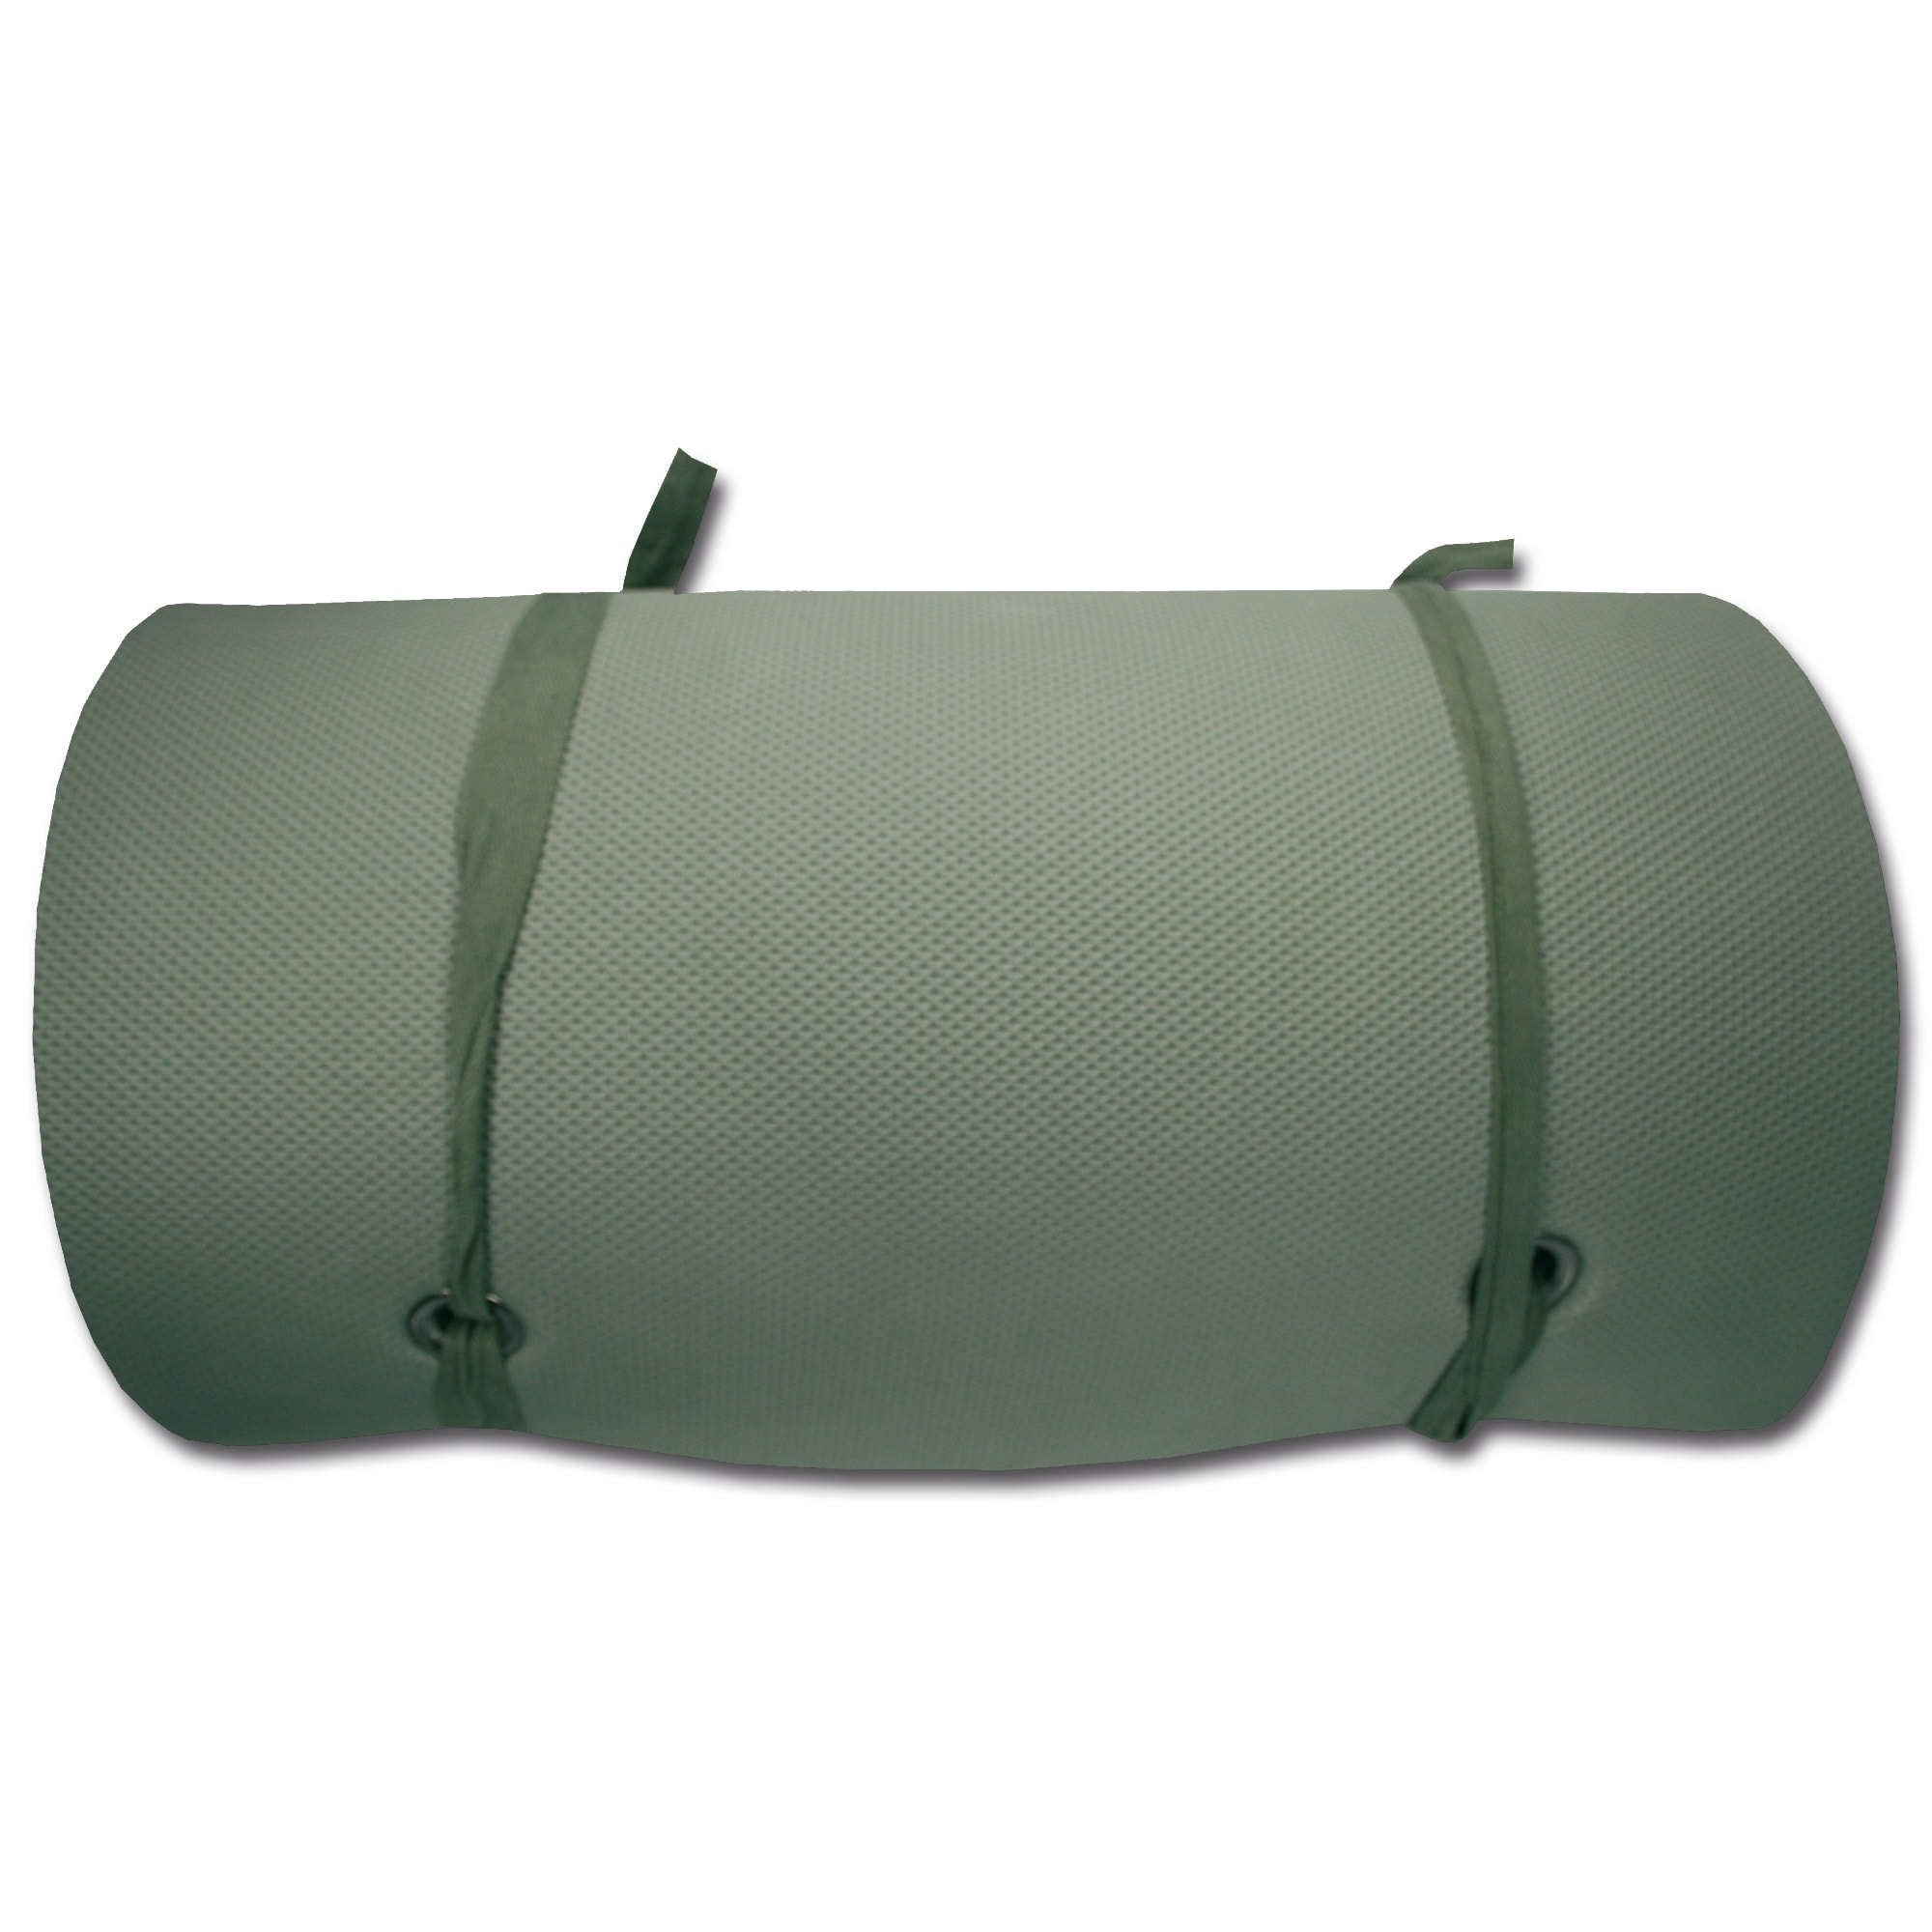 Purchase the Mil-Tec Sleeping Pad by ASMC